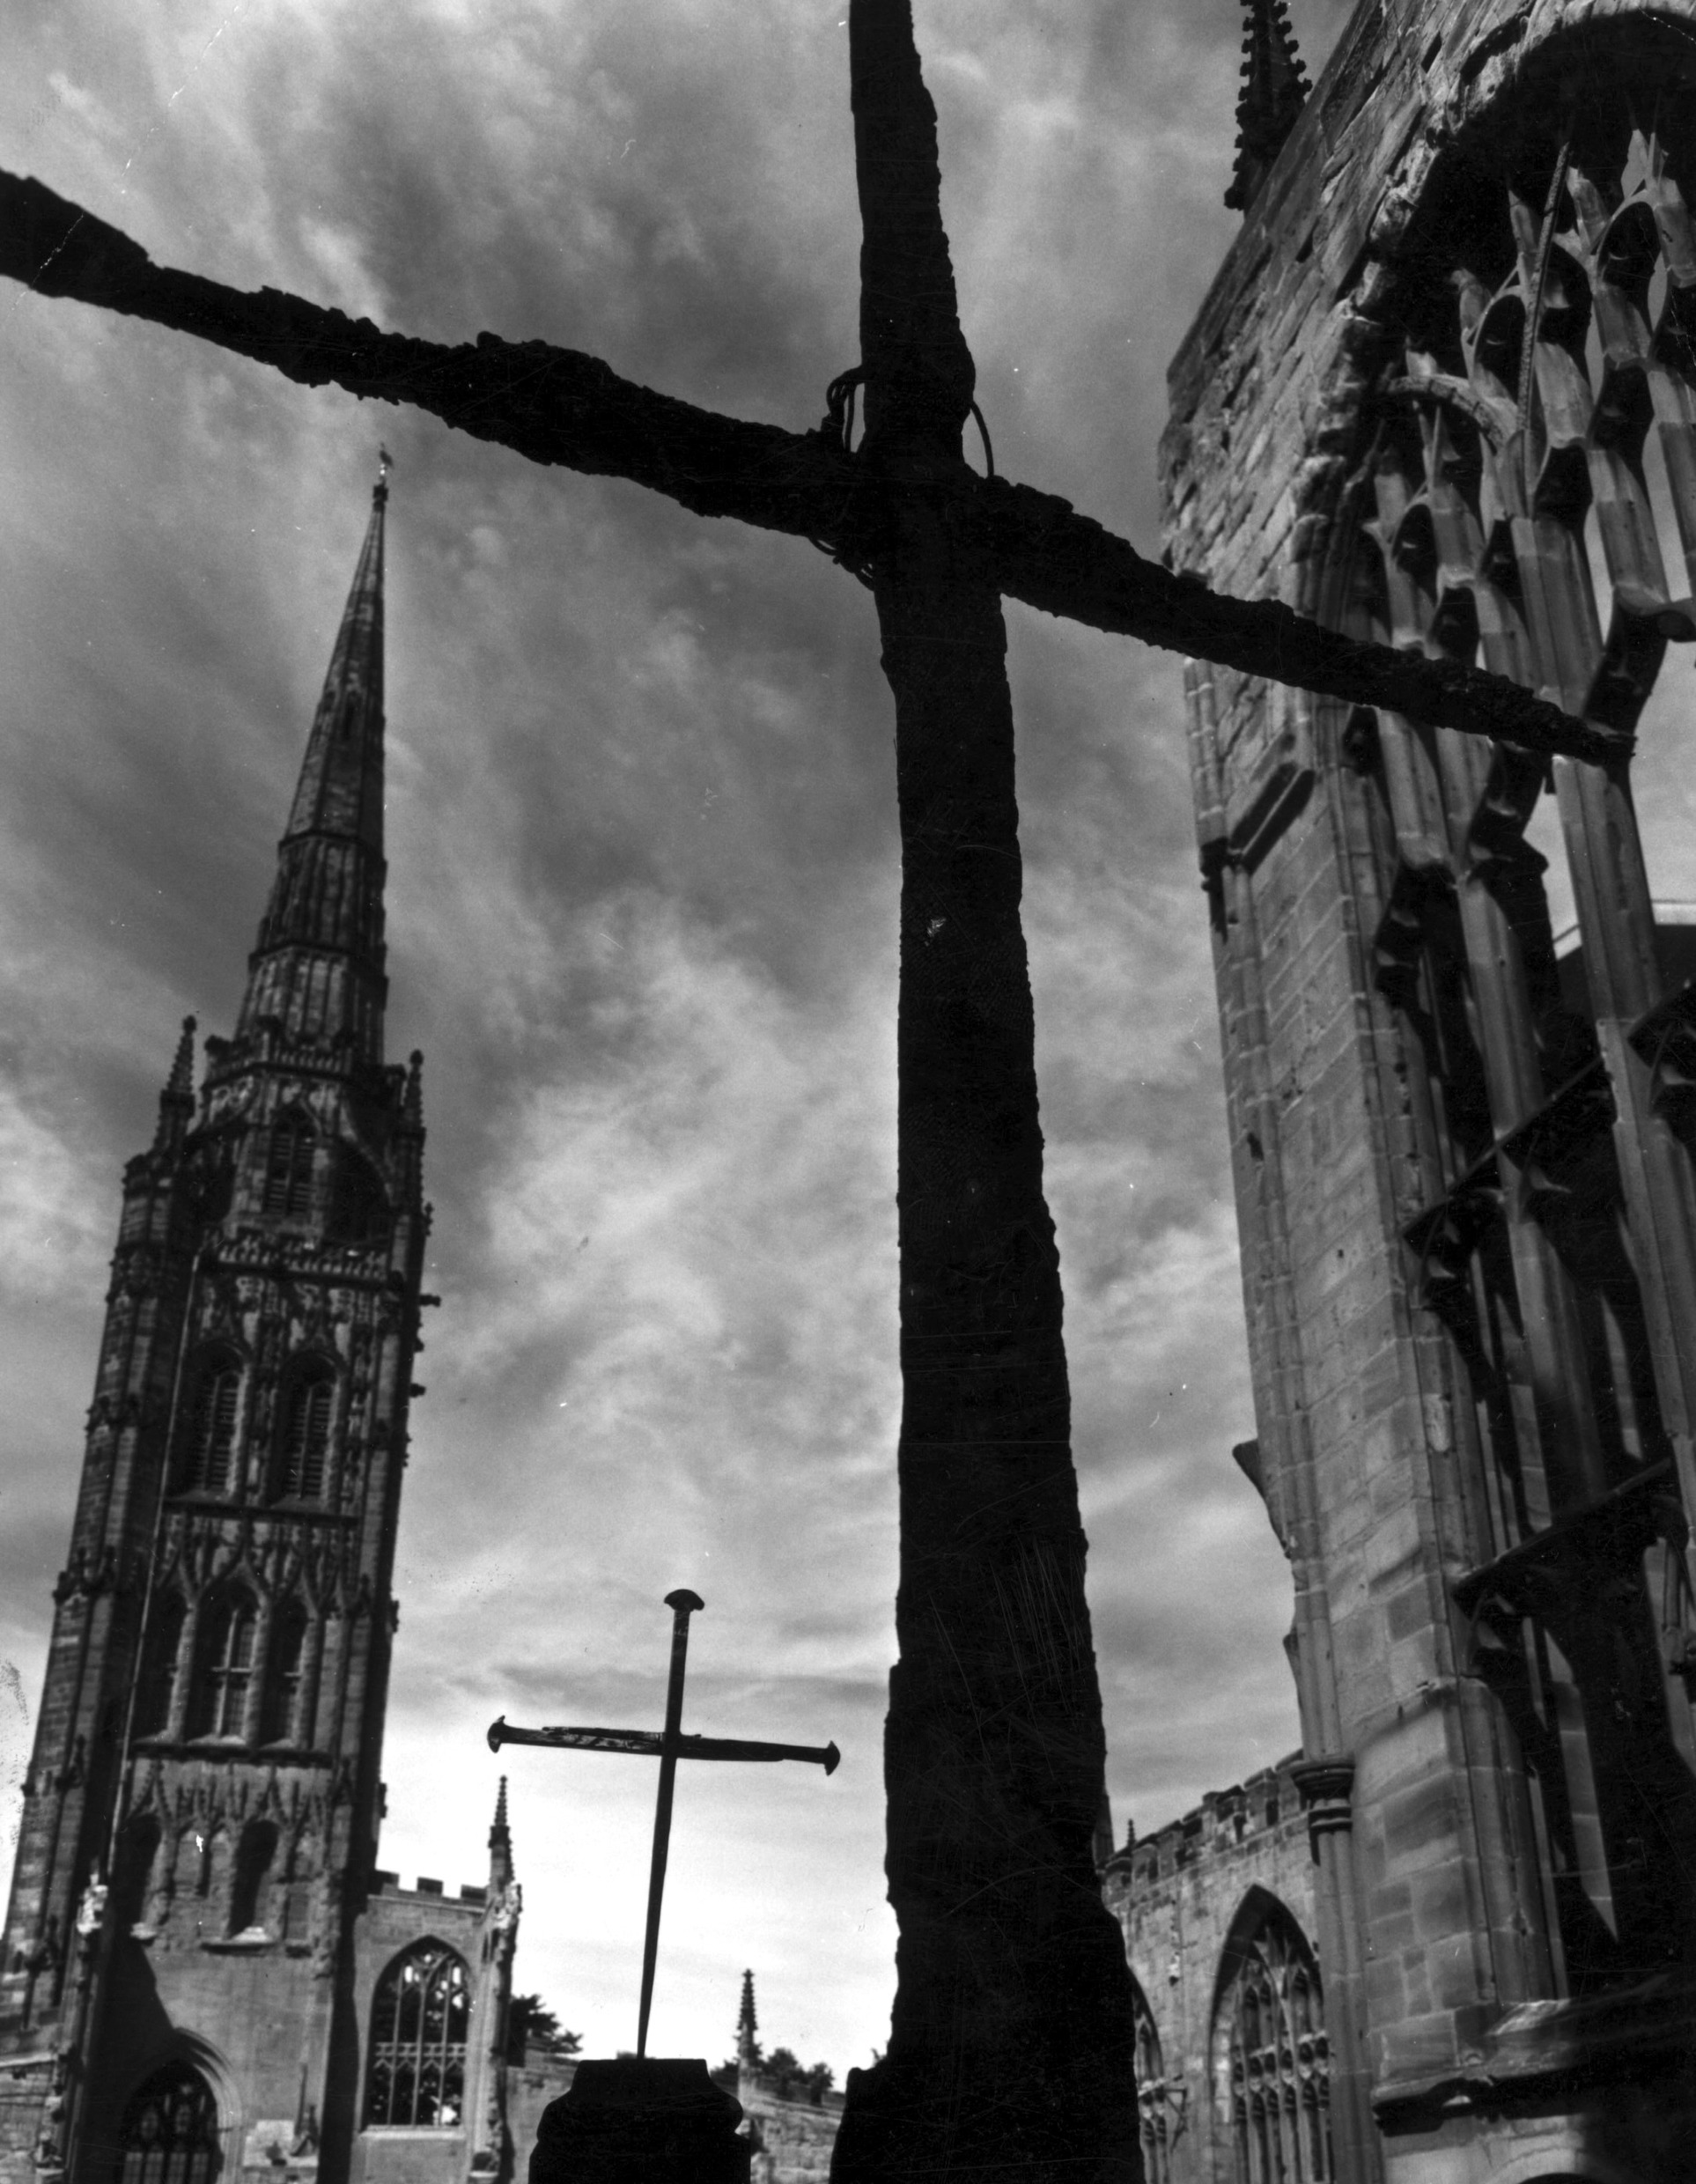 A black and white photograph taken in Coventry Cathedral Ruins, with the burned cross on the altar silhouetted in the foreground against a dramatic sky and the top of one of the windows. In the background is the old spire and a large-scale recreation of the cross of nails